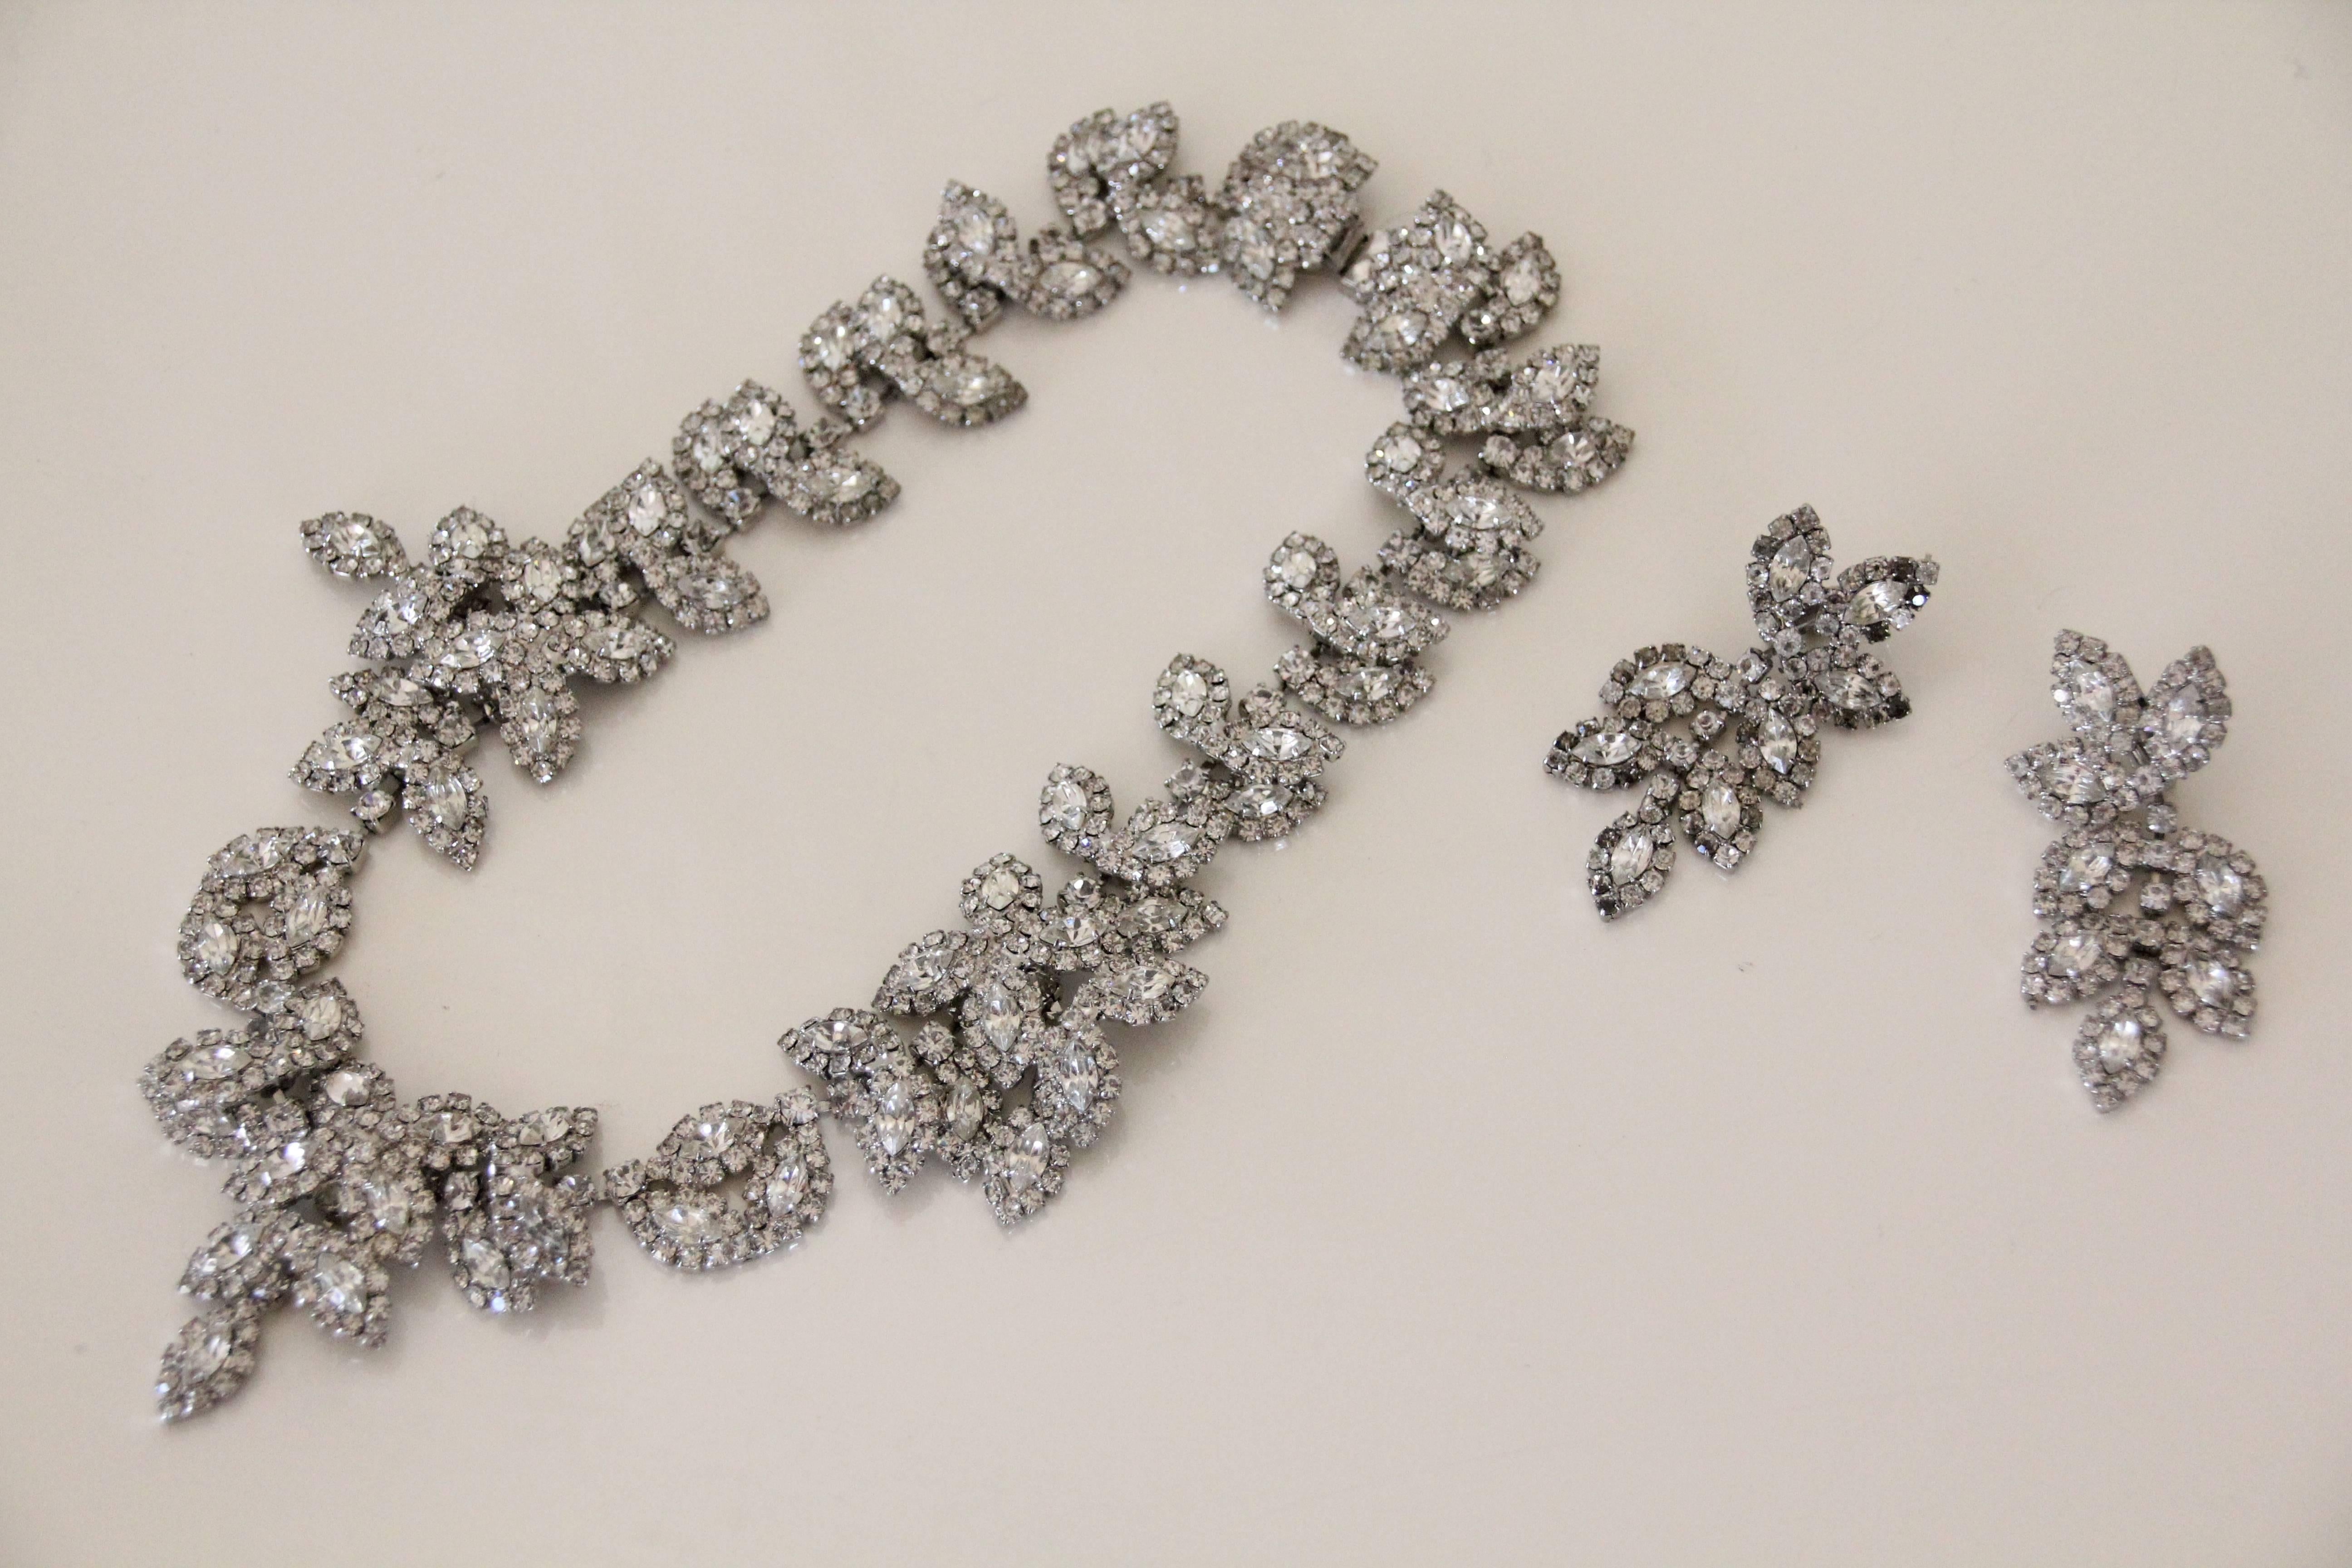 A classic 1980s foliate clear rhinestone necklace and clip earring set!  with 3 larger lobes of foliage at center and sides.  This set gives a gorgeous shine and is nicely articulated, not stiff. It is a collar length necklace and the earrings are